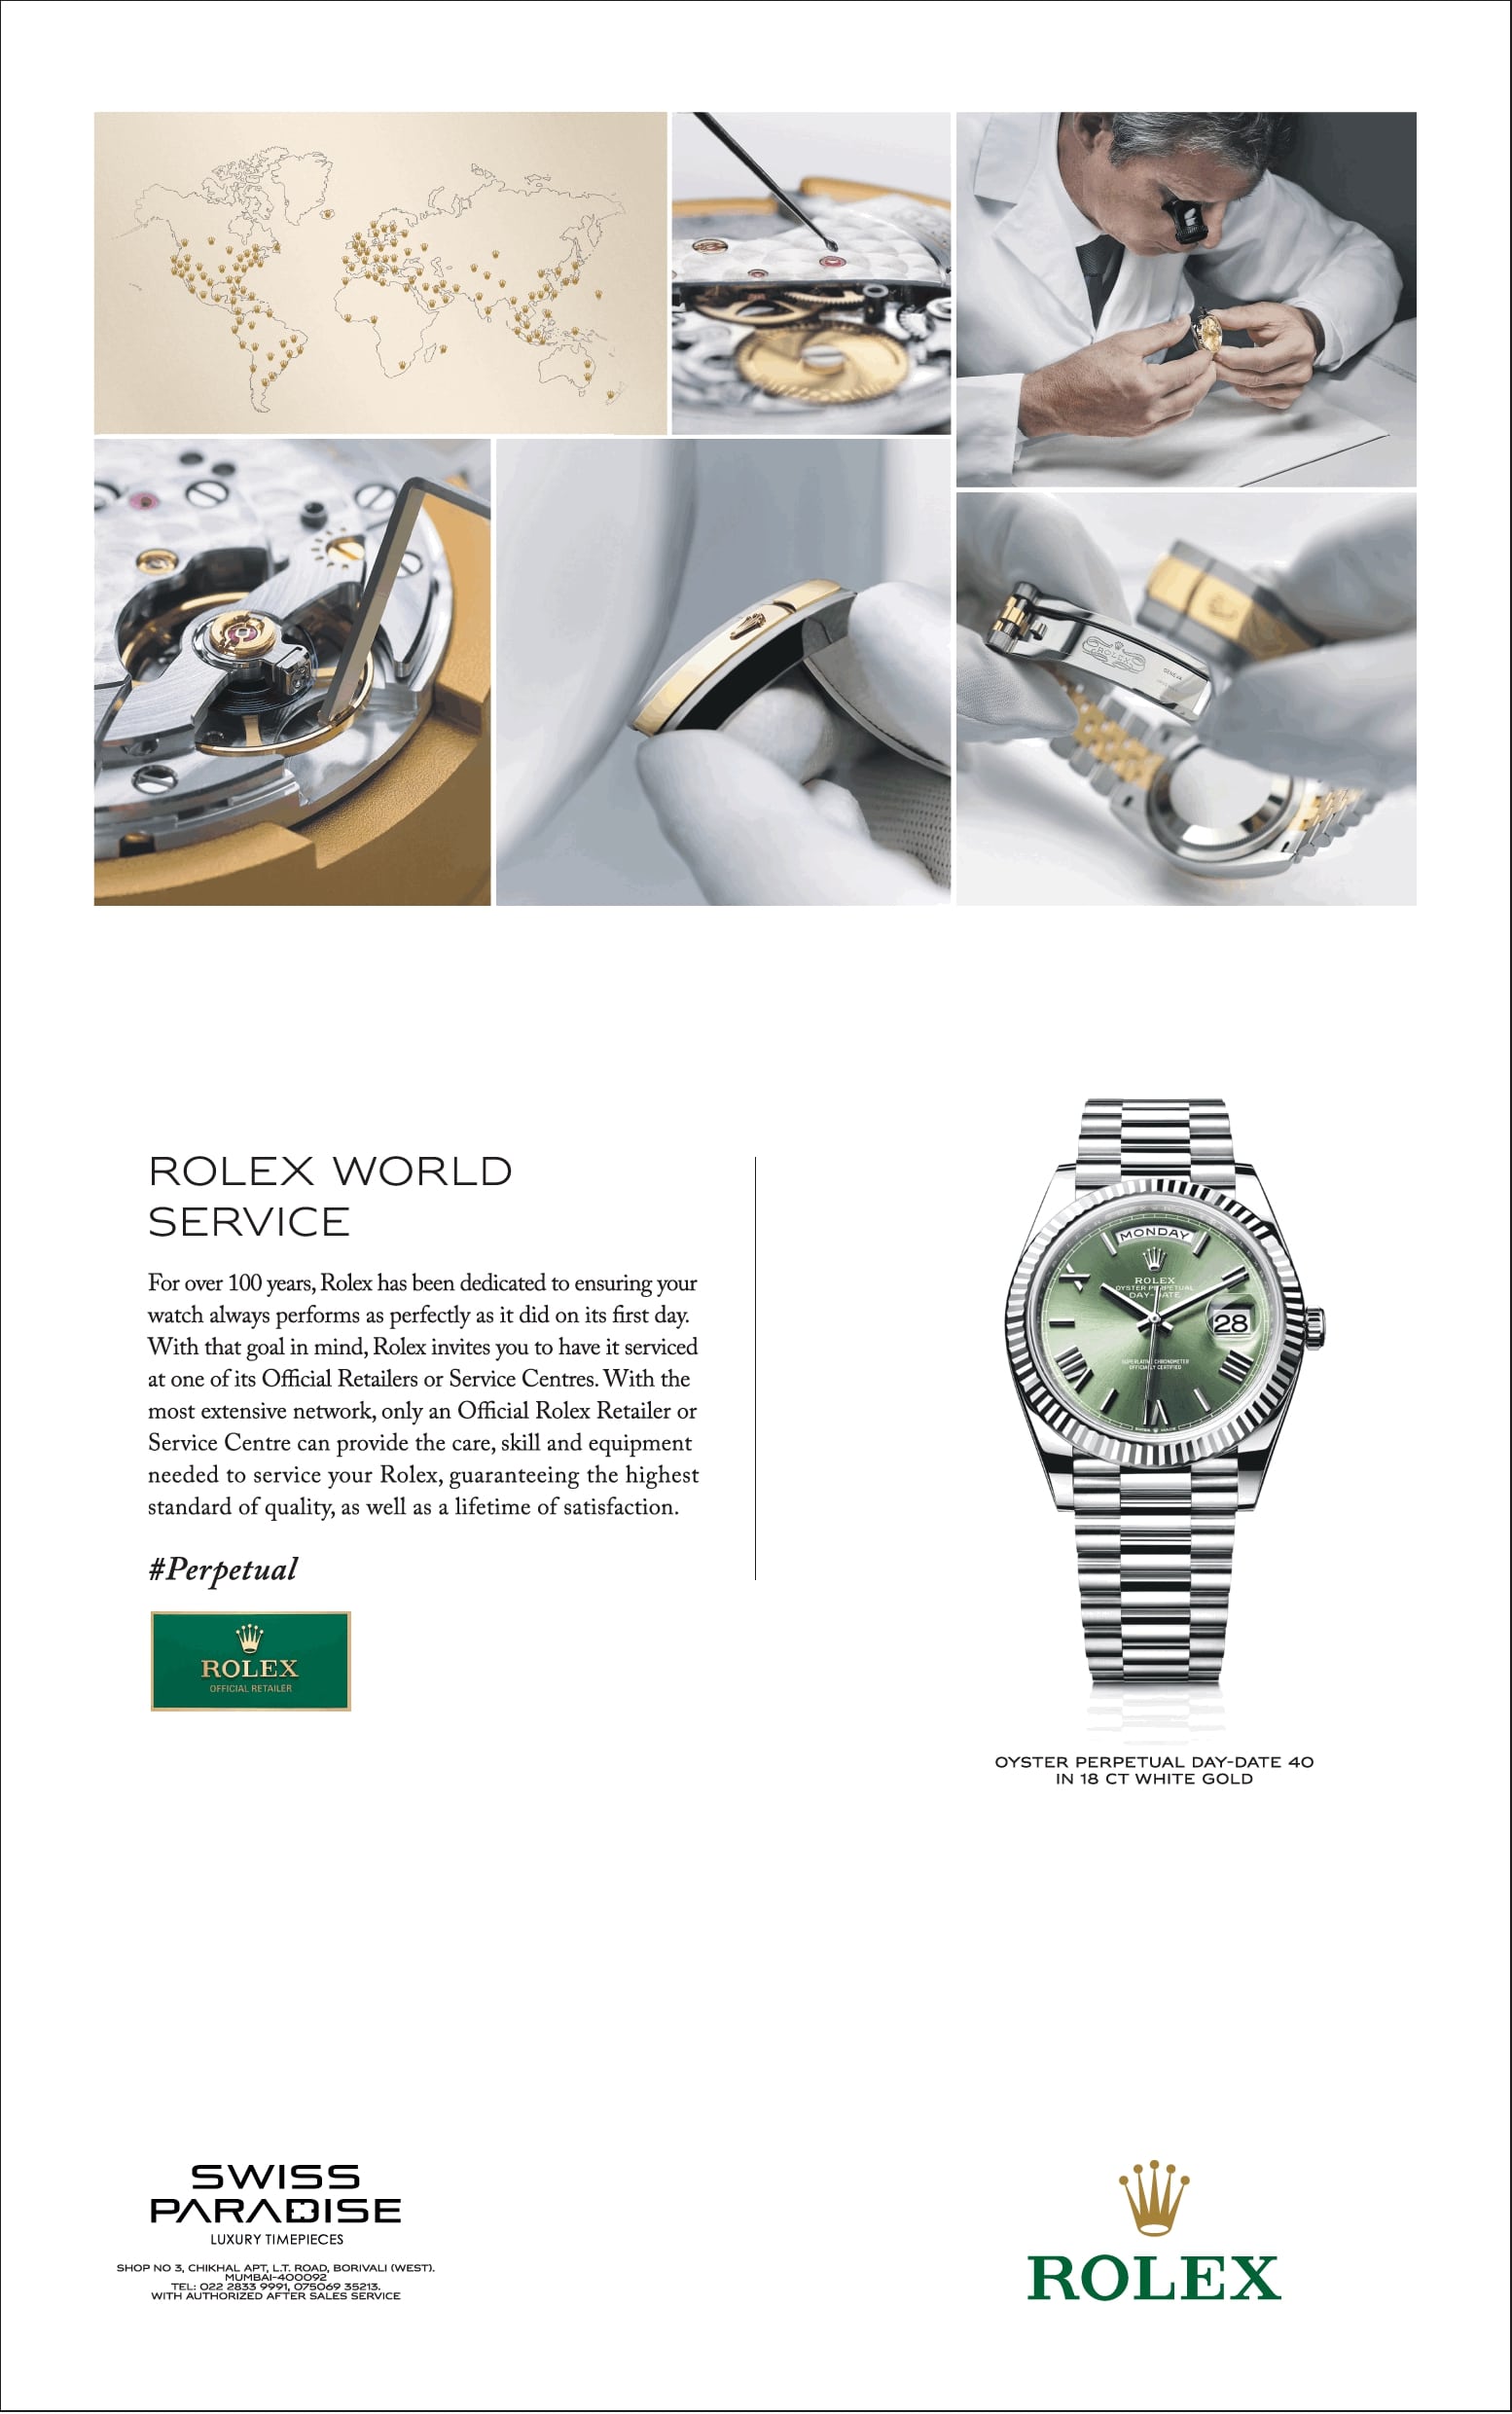 rolex-swiss-paradise-oyster-perpetual-day-date-40-in-18-ct-white-gold-ad-times-of-india-mumbai-11-02-2021